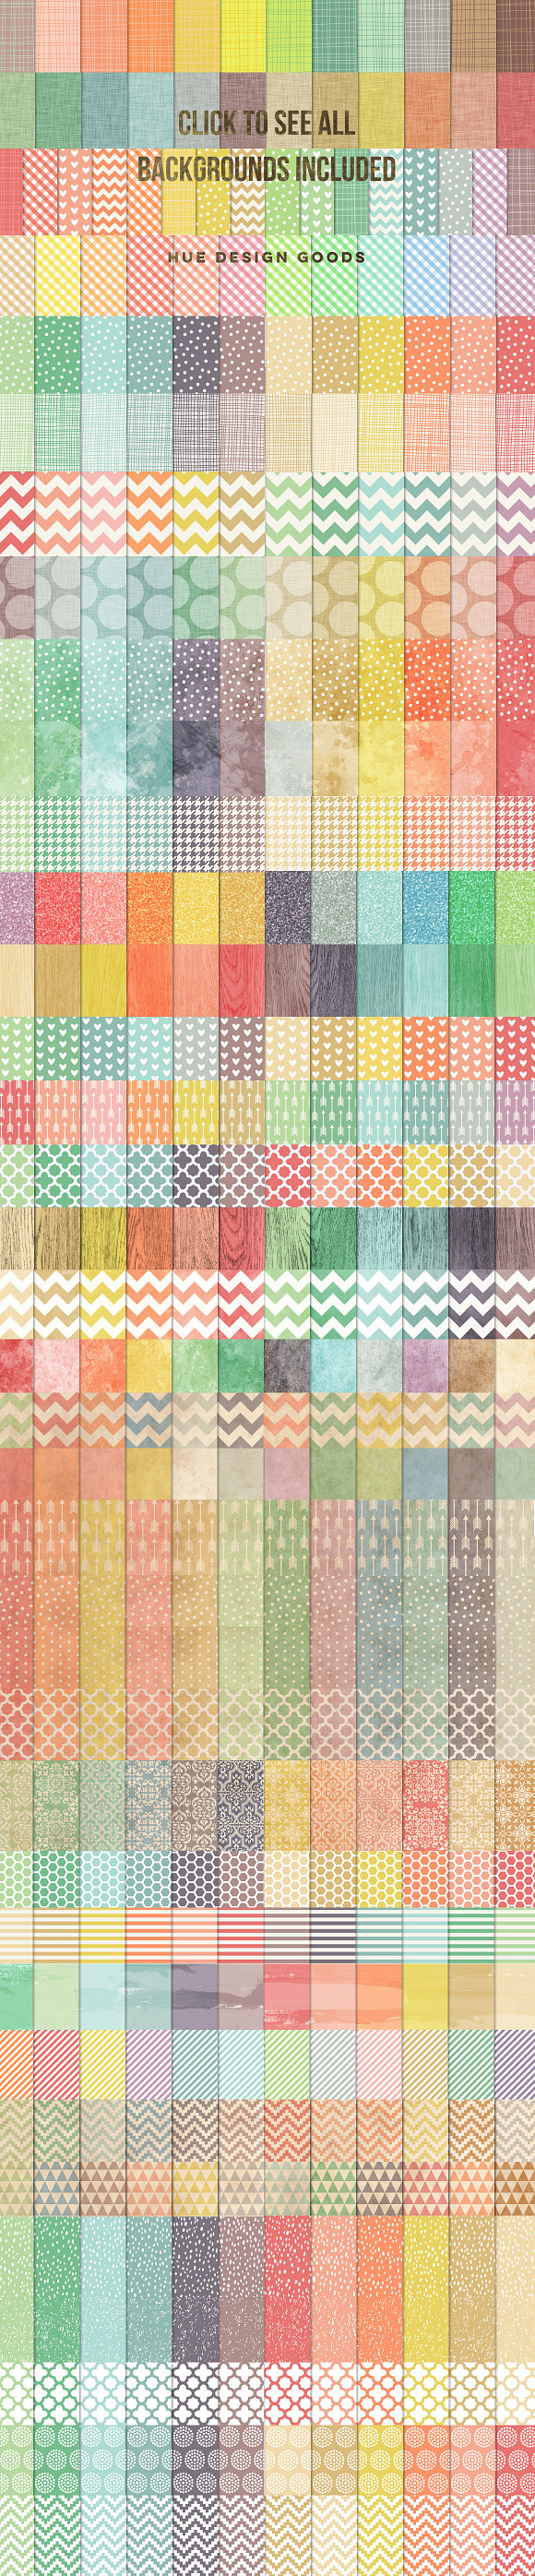 Vintage Pastel Backgrounds Bundle in Patterns - product preview 1